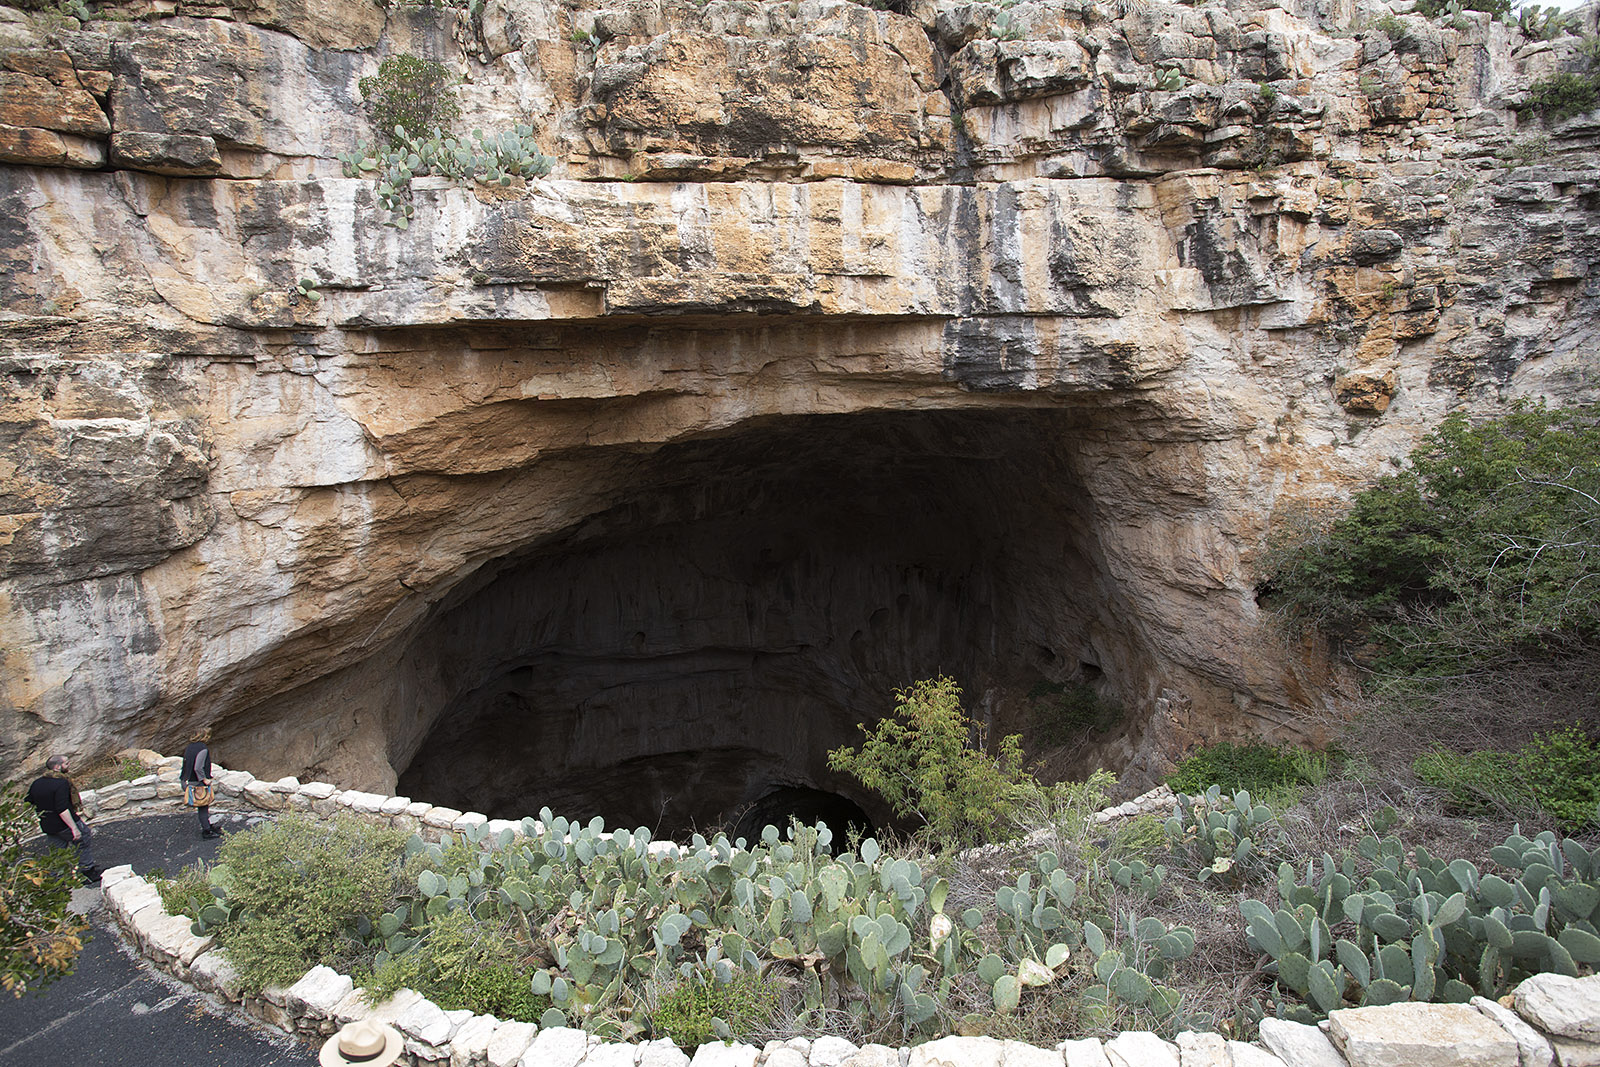 Natural Entrance to Carlsbad Cavern.  As you descend down the pathway into the cavern, there is an overwhelming odor of ammonia from the bat quano.